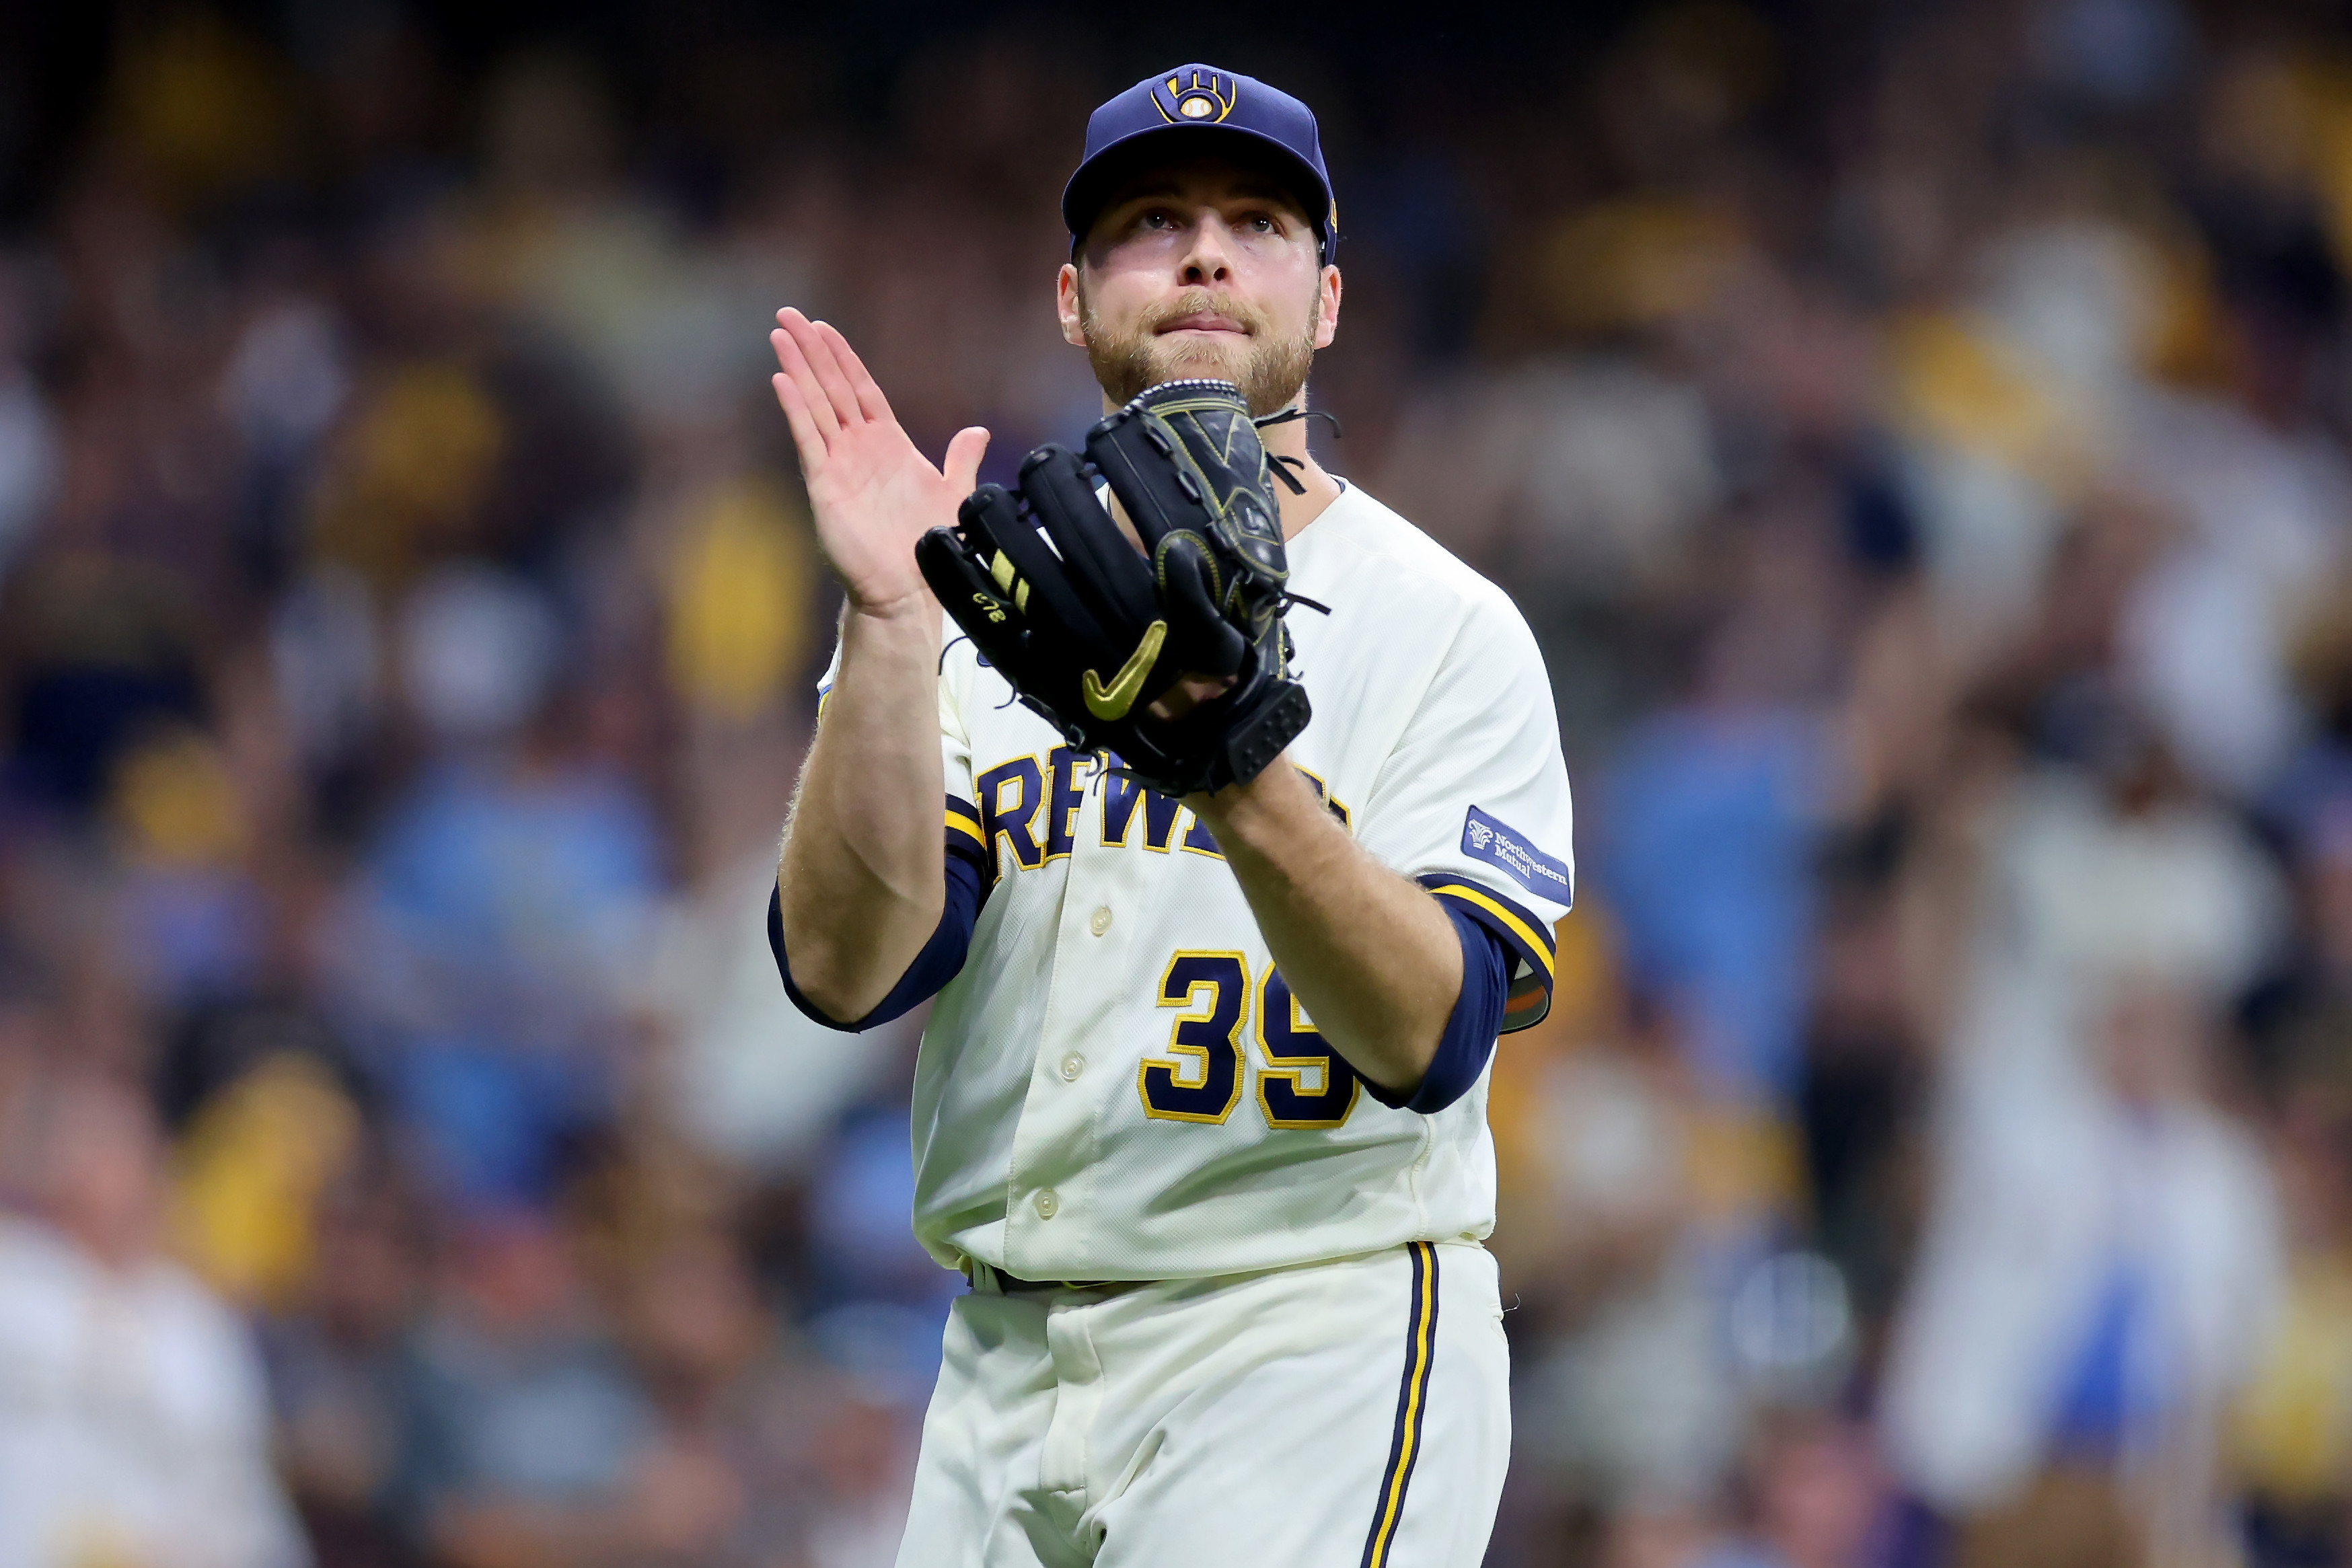 Punch out: Brewers reliever Devin Williams breaks hand after